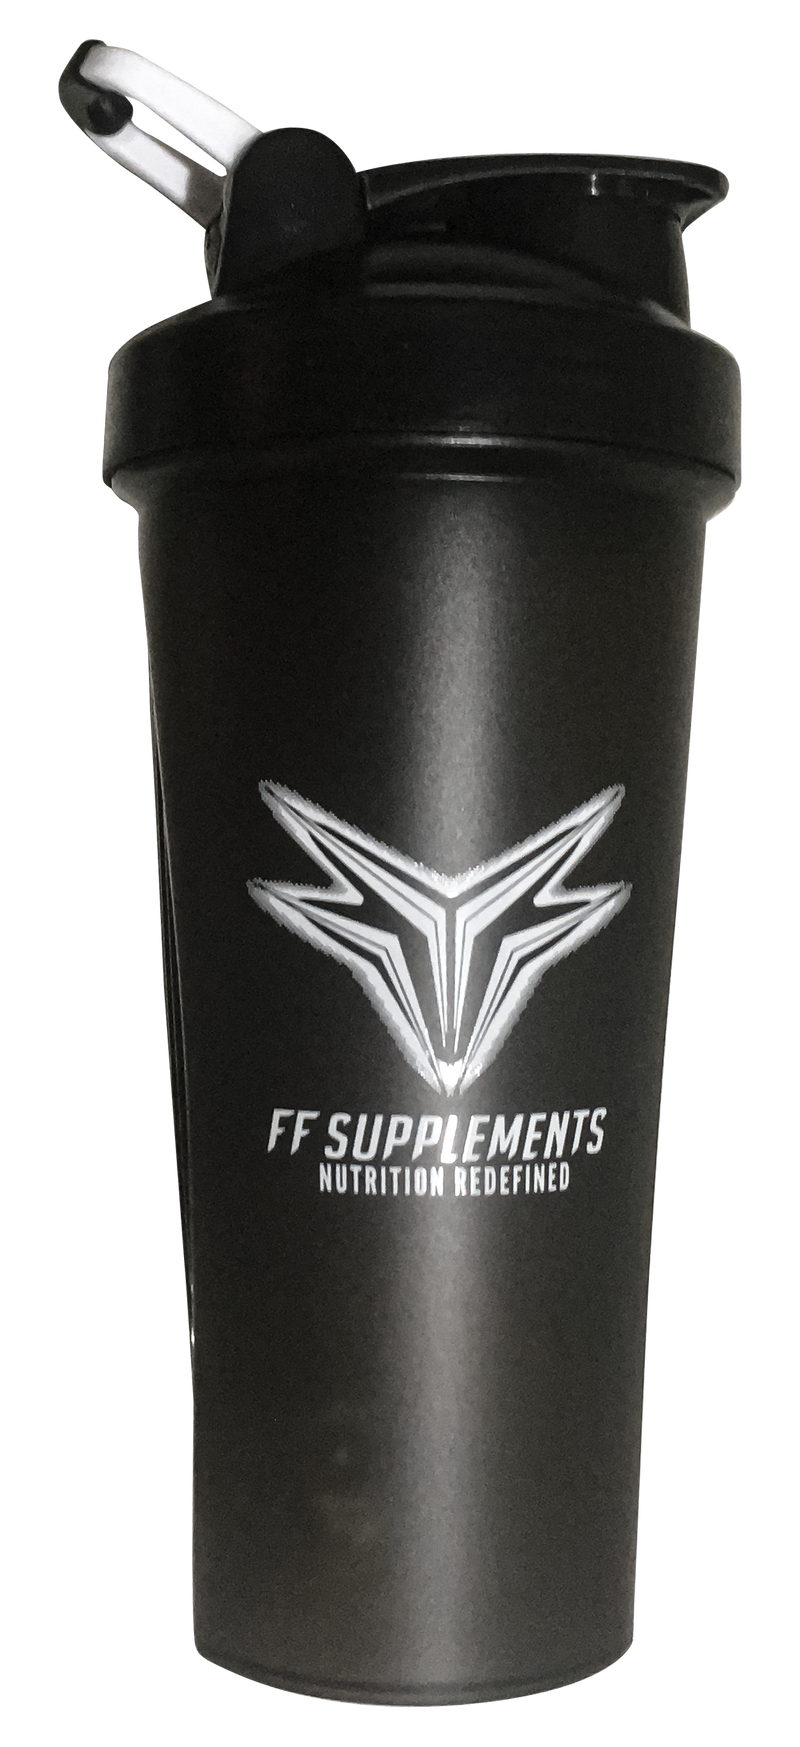 FF Supplements 750ml High Quality Shaker